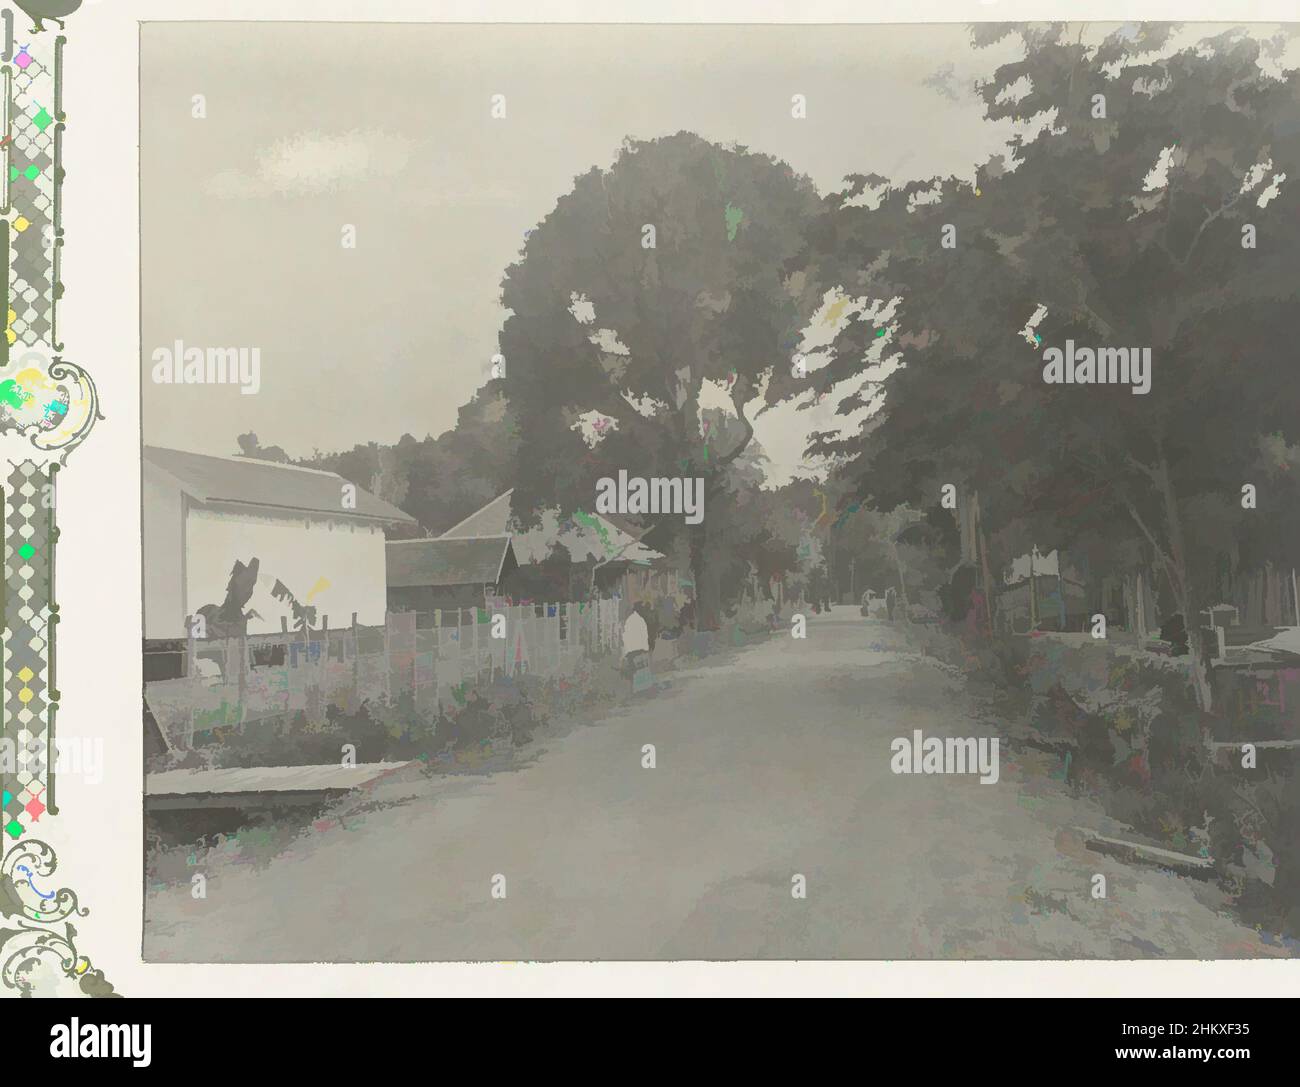 Art inspired by View in a village, View of a road in a village with houses on either side, in the distance a street lamp. Photograph in the photo album on oil extraction in Borneo by the Royal Dutch Petroleum Company (KNPM) in the years 1903-1907., Kalimantan, 1903 - 1907, paper, Classic works modernized by Artotop with a splash of modernity. Shapes, color and value, eye-catching visual impact on art. Emotions through freedom of artworks in a contemporary way. A timeless message pursuing a wildly creative new direction. Artists turning to the digital medium and creating the Artotop NFT Stock Photo